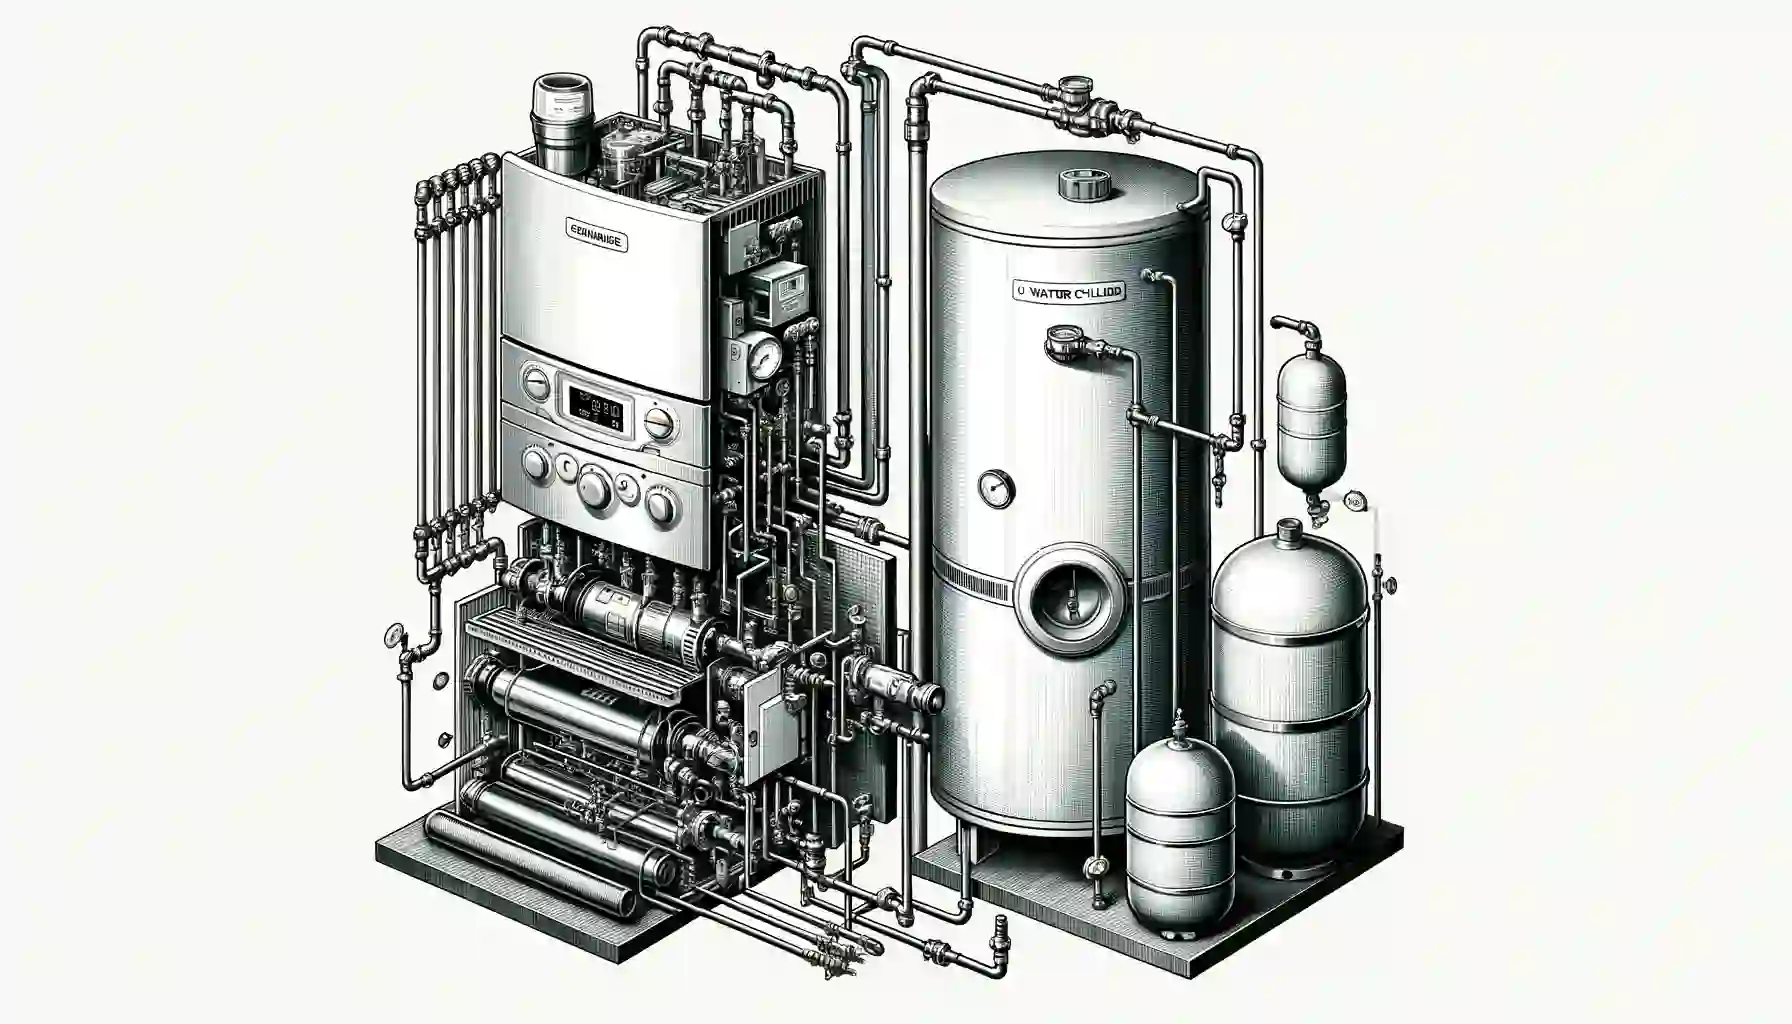 mage of a central heating system, including a system boiler, a hot water cylinder, and an expansion vessel. The image illustrates the layout and connection of these components in a typical home heating setup. 